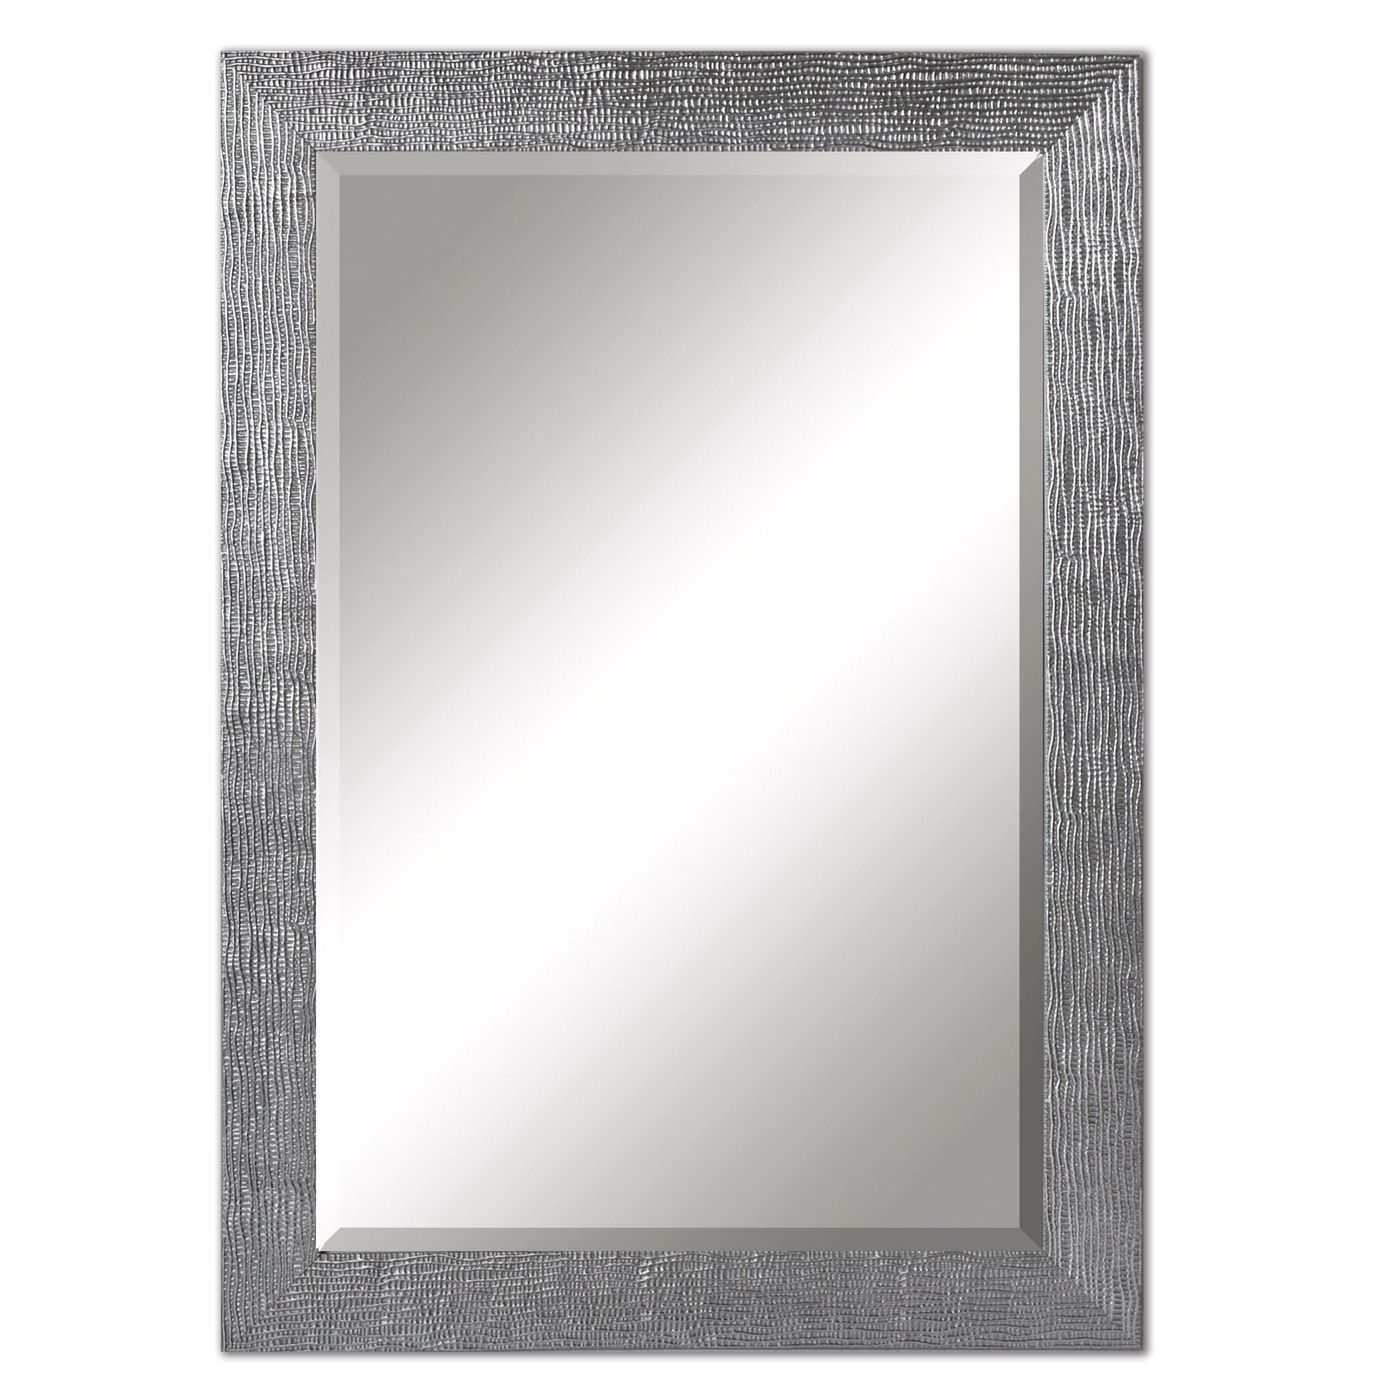 2021 Silver Beaded Square Wall Mirrors In Tarek Contemporary Silver Beaded Frame Mirror  (View 6 of 15)